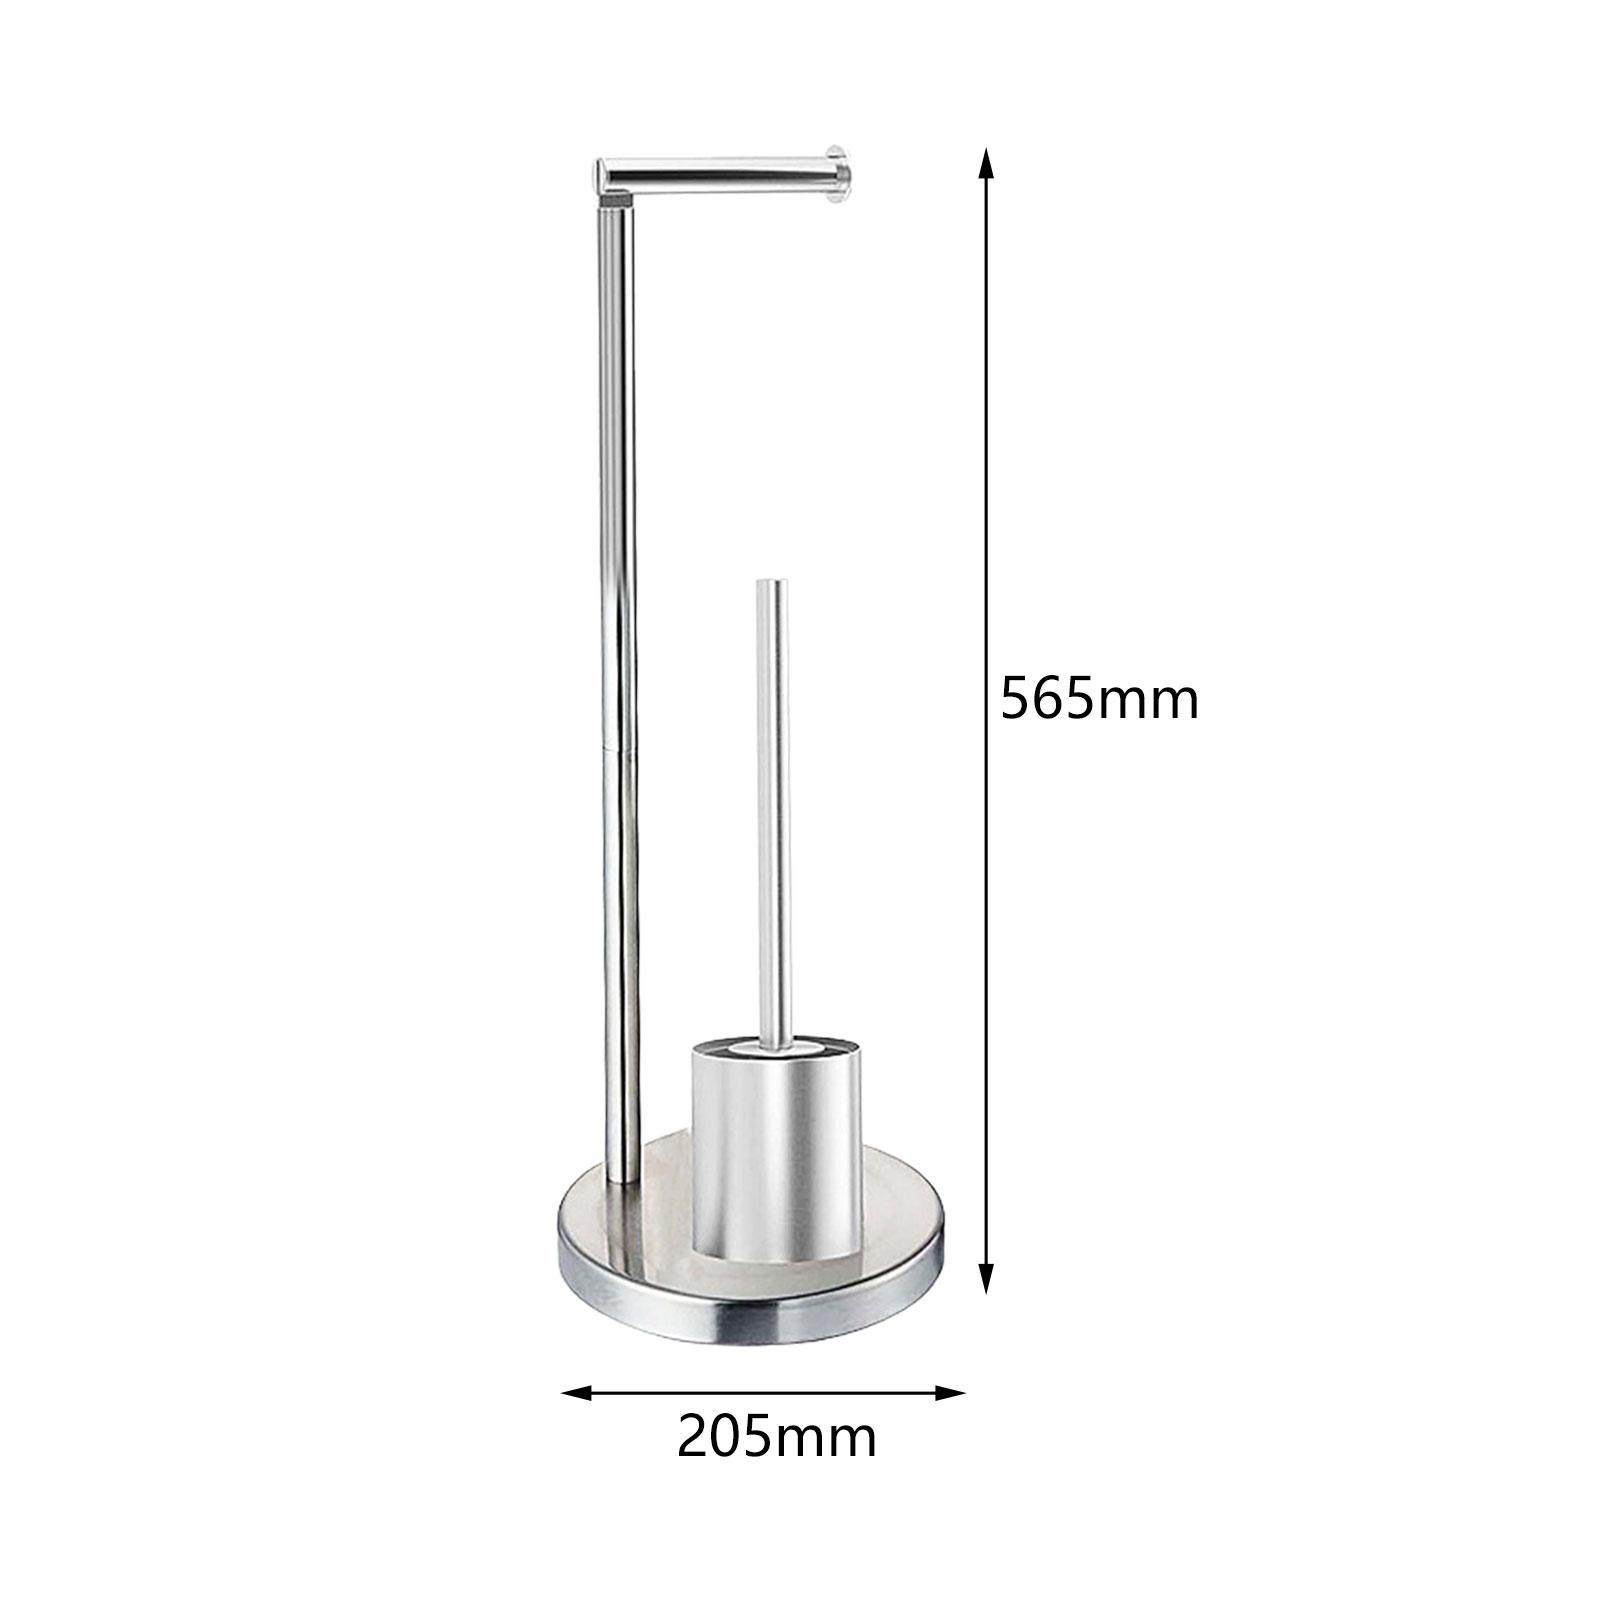 Toilet Roll Holder Stand with Toilet Brush Industrial Toilet Paper Dispenser